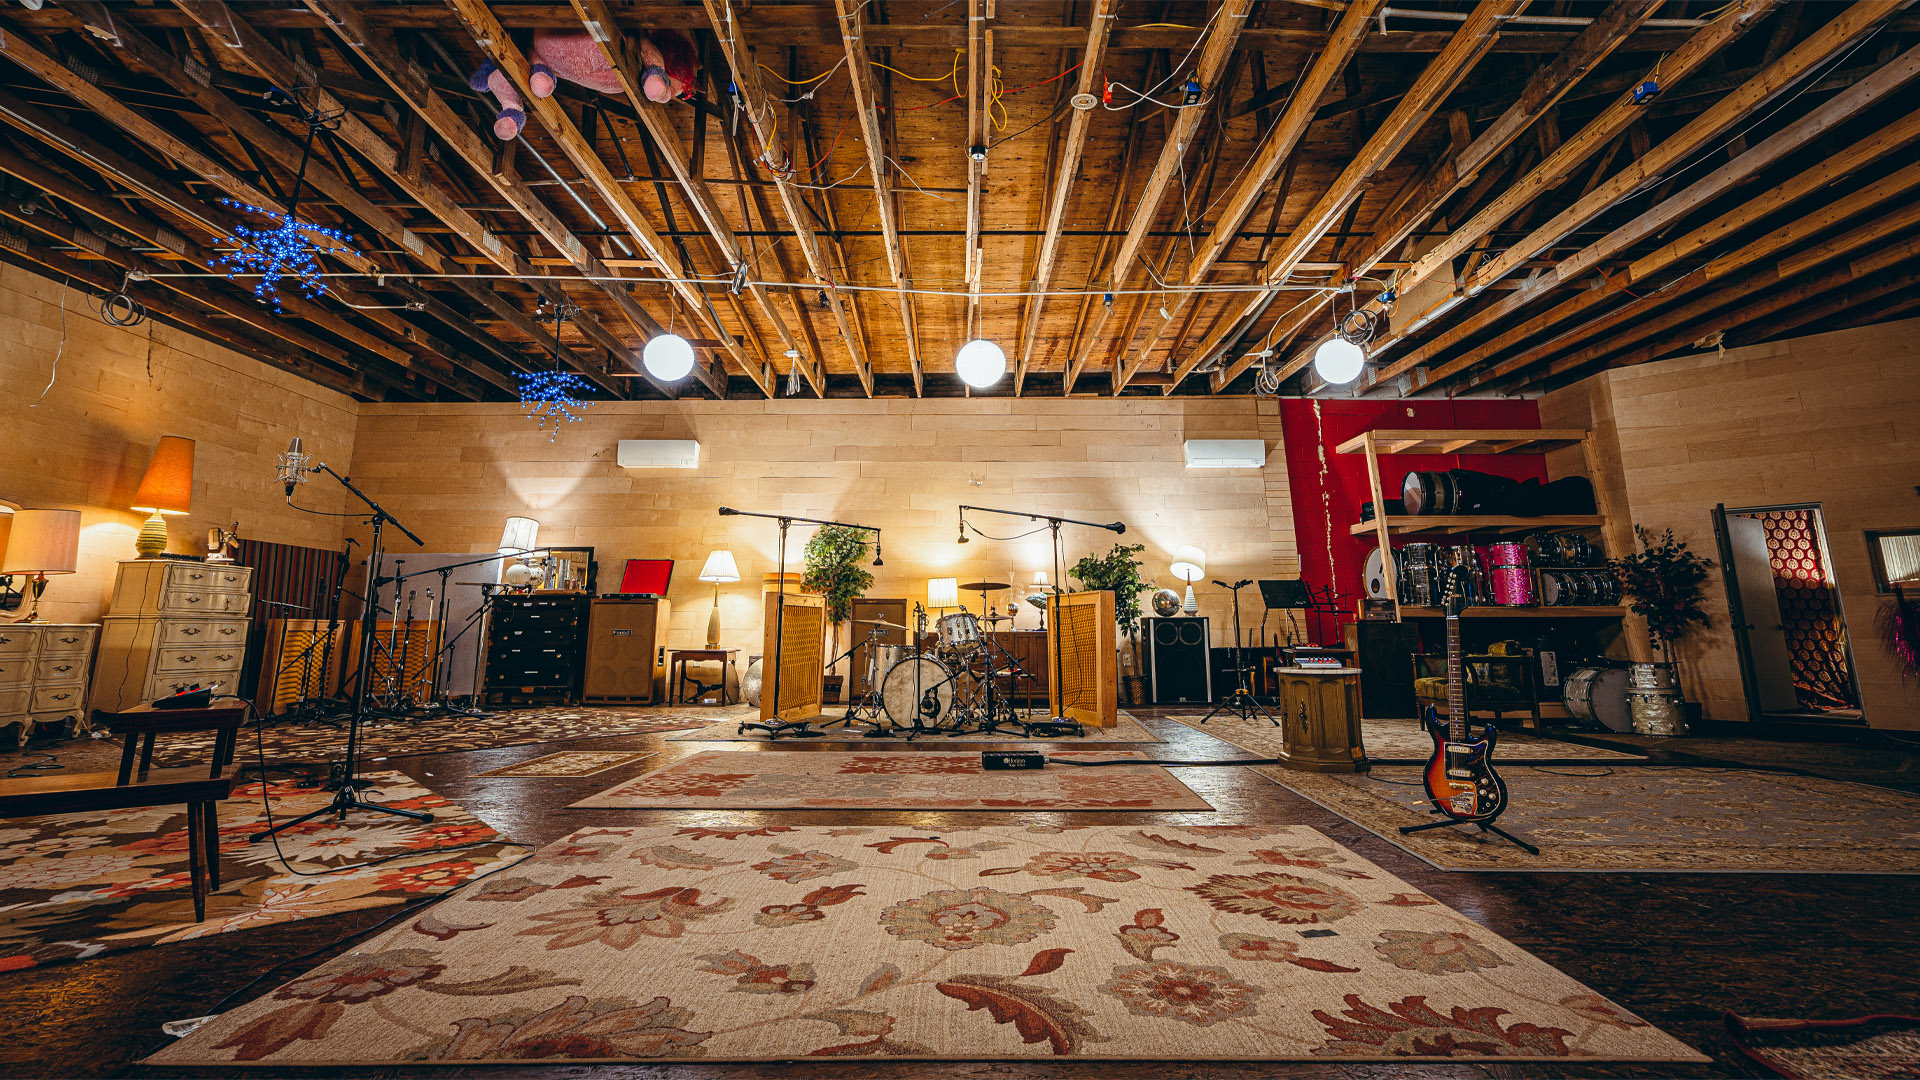 Showcase image of the live room, featuring guitars, drums and kits, and other equipment.